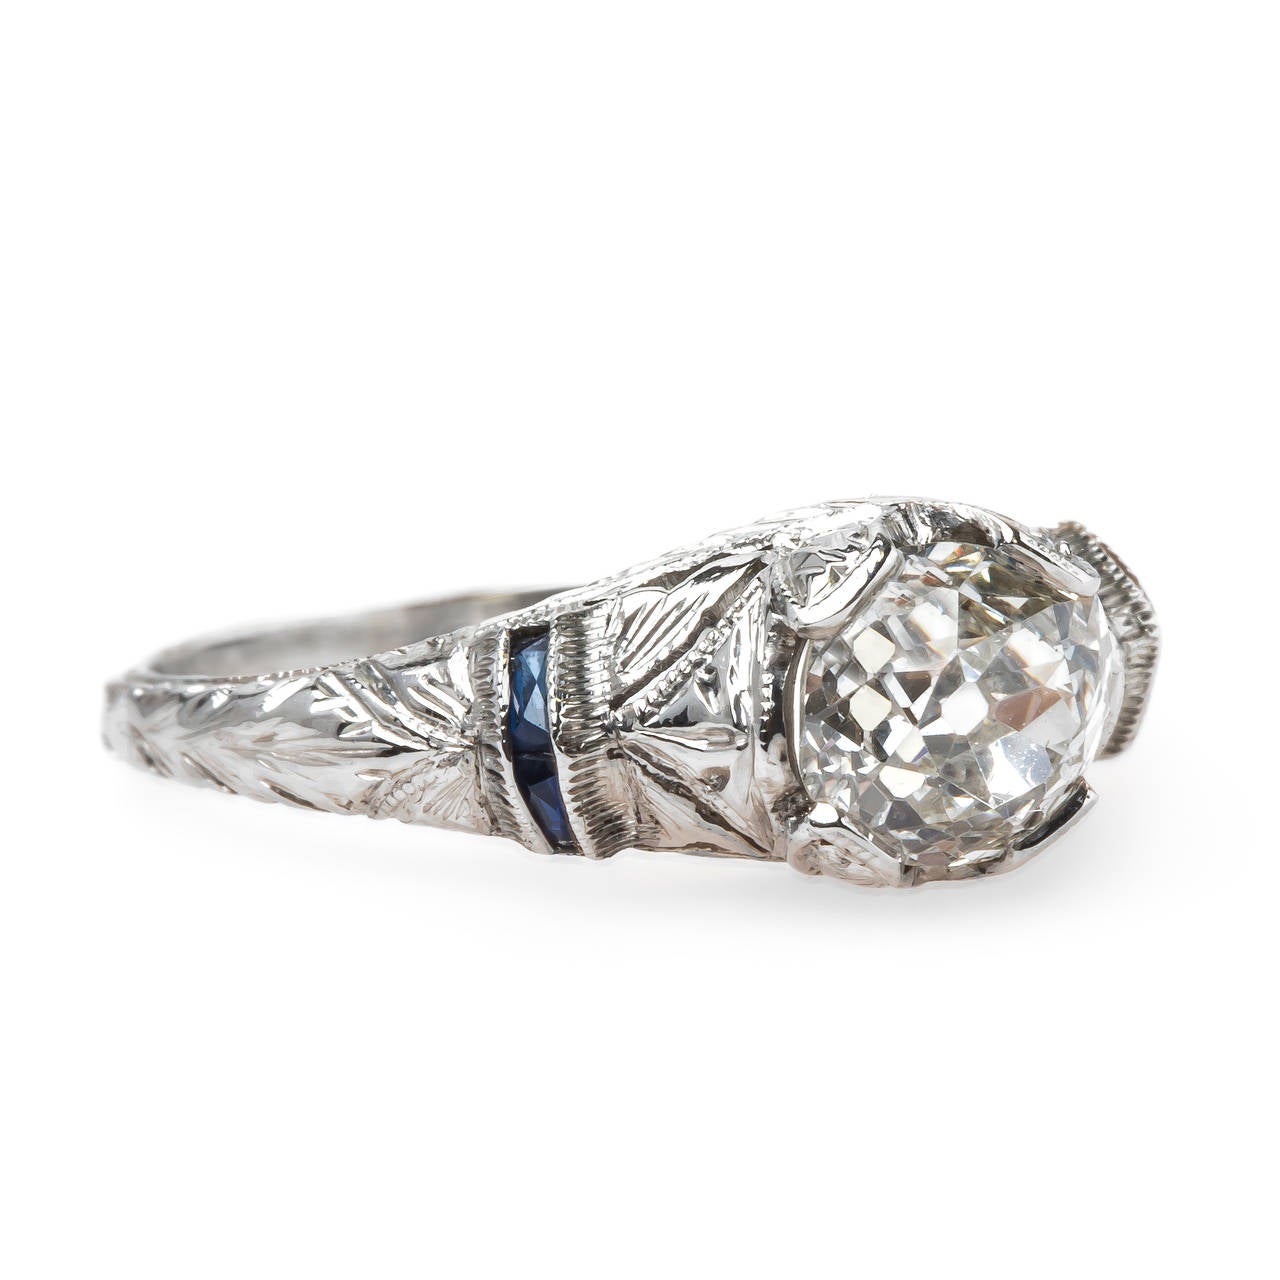 Edenstone is a delicate and authentic Edwardian era (circa 1915) platinum engagement ring featuring a 0.99ct EGL certified Old Mine Cushion Cut diamond graded I color and VS2 clarity. The center stone is nestled between four French Cut bright blue